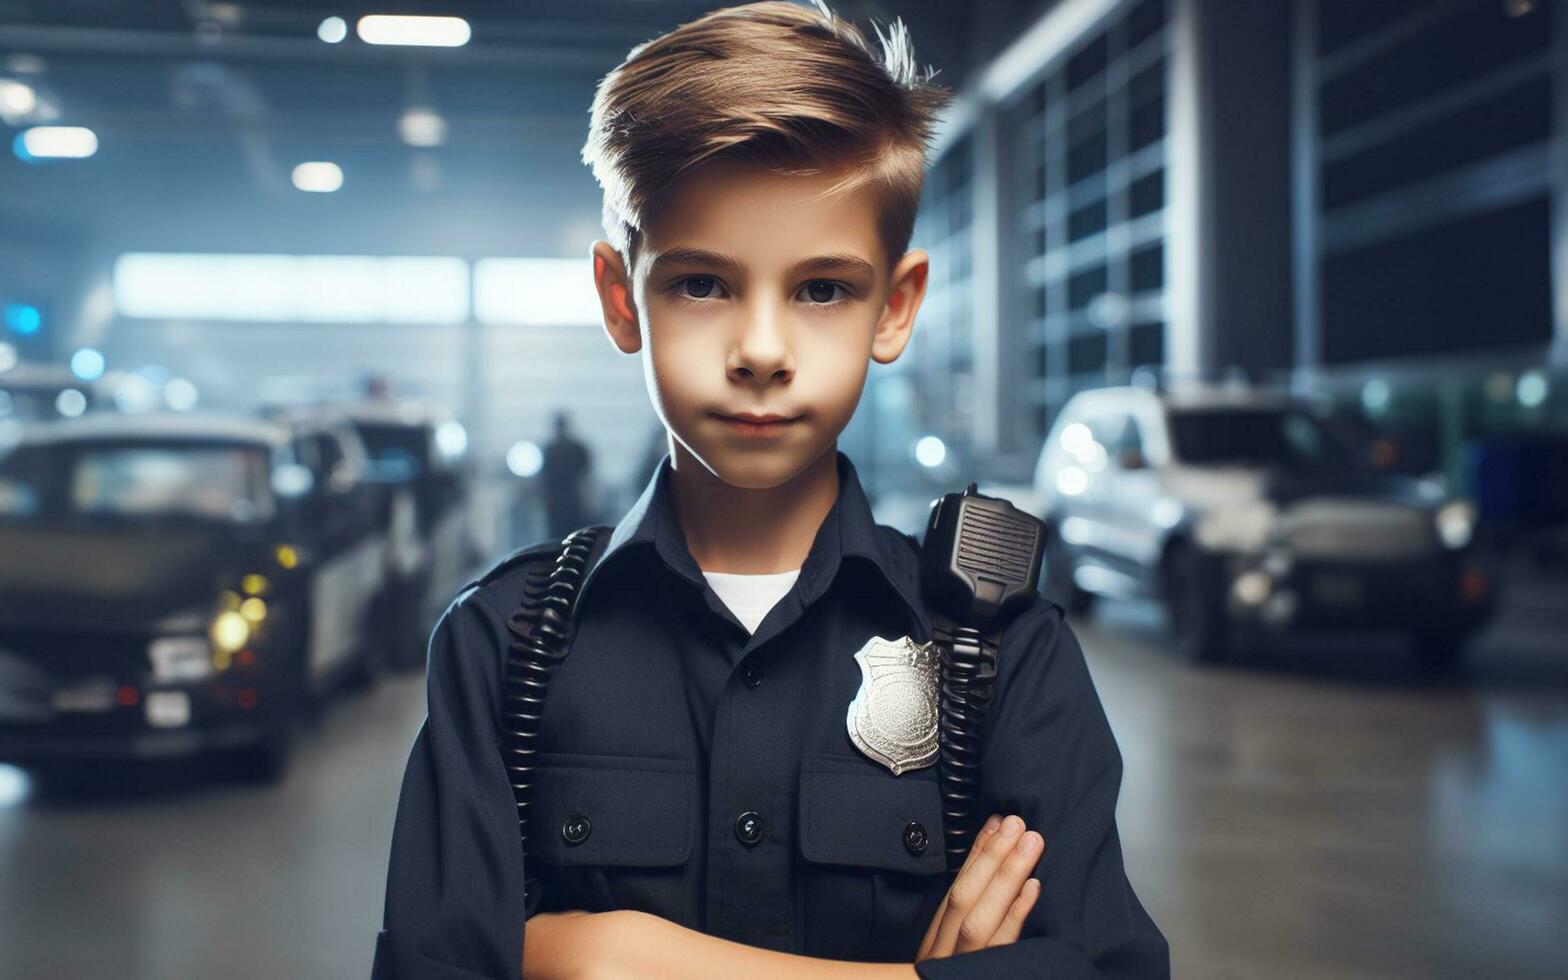 AI generated 10 year old boy wearing police uniform police station background Children's future career ideas photo